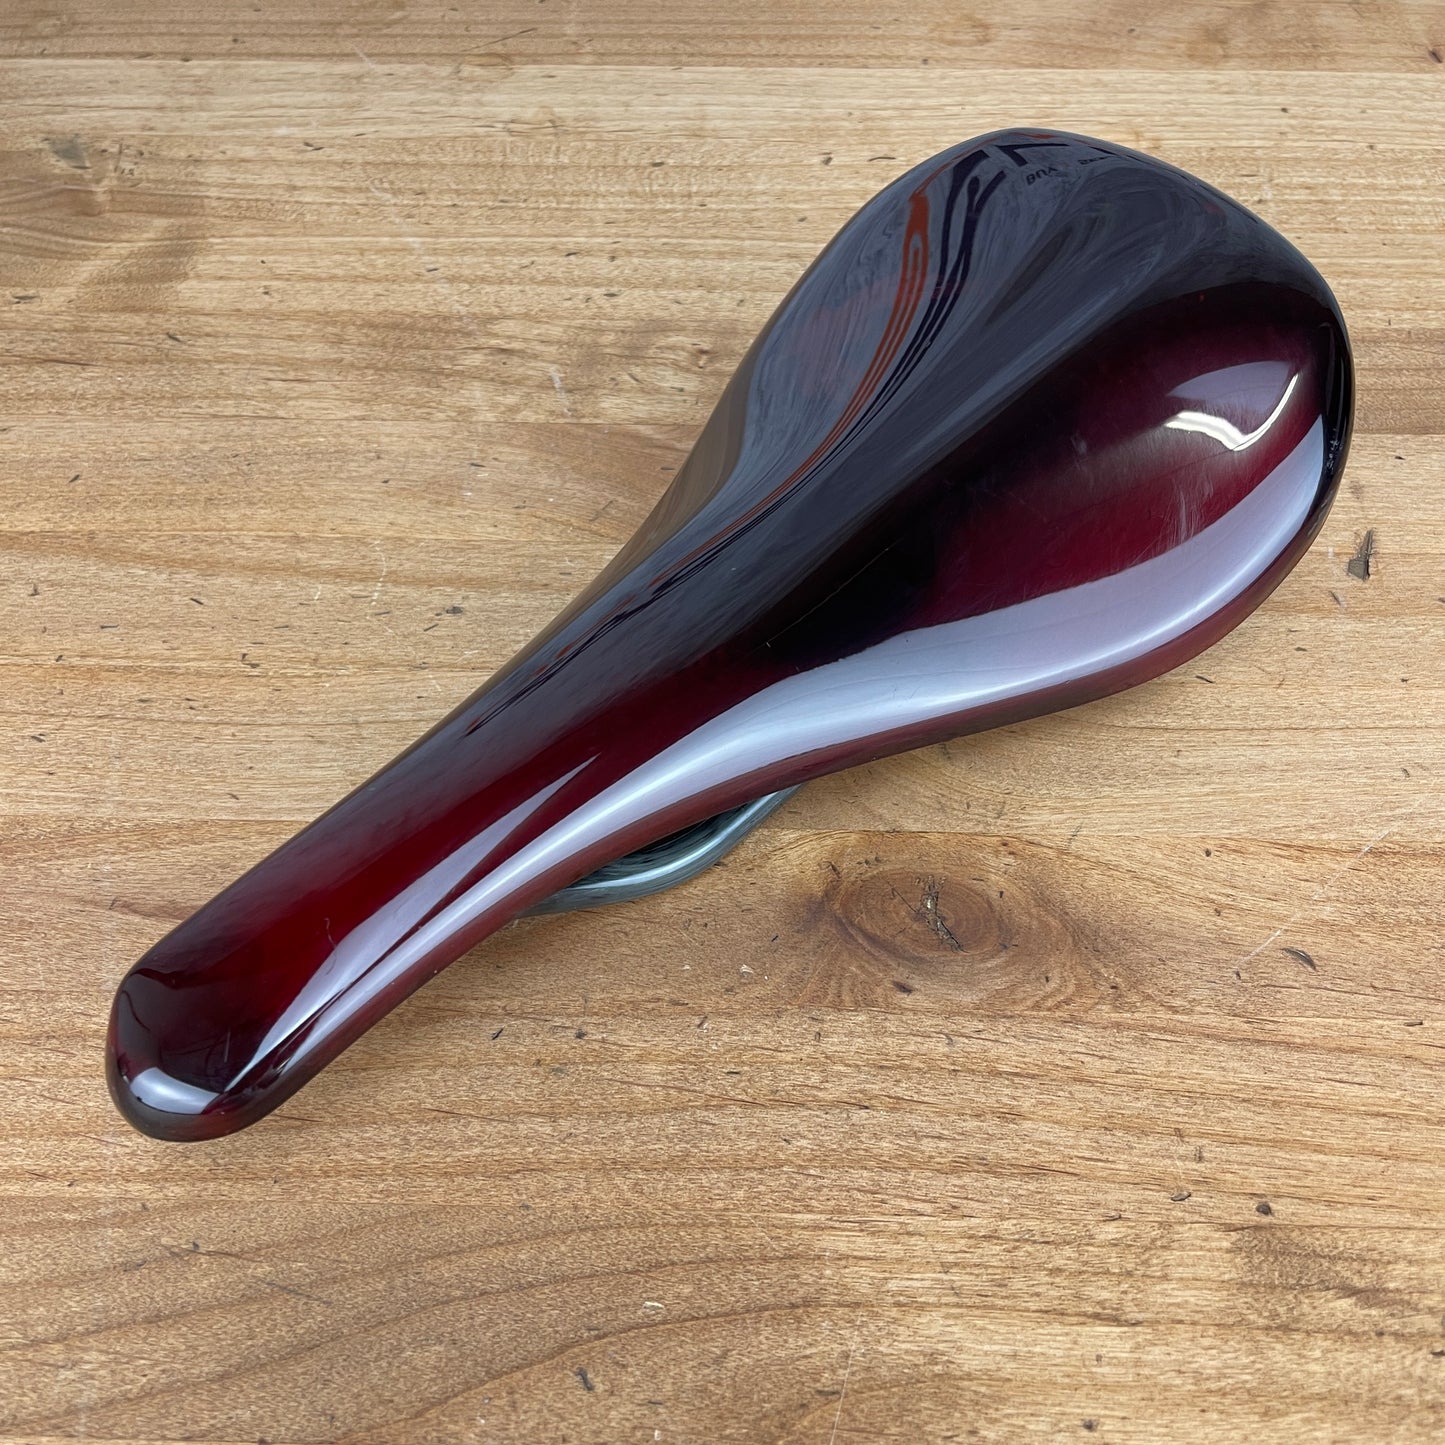 Beast Components Pure Red Gloss 7x9mm Carbon Rails Bicycle Saddle 100g